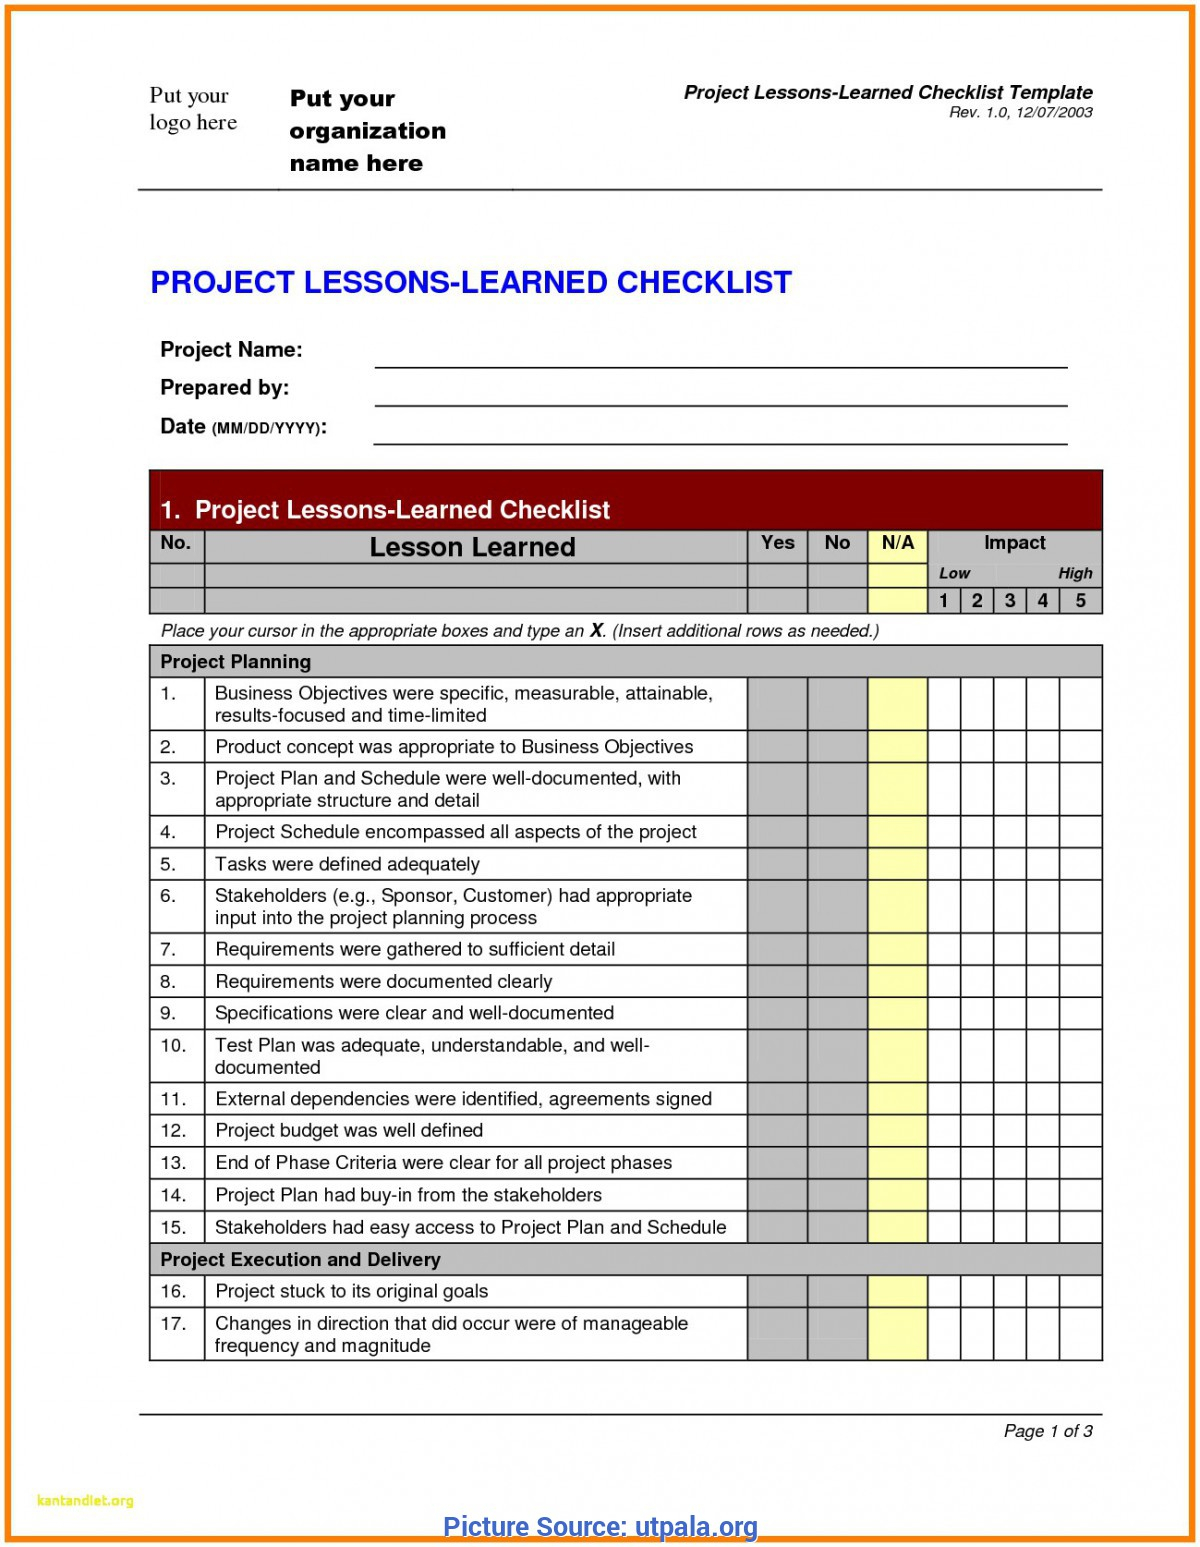 Fresh Lessons Learned Report Template Prince2 Prince2 With Regard To Prince2 Lessons Learned Report Template